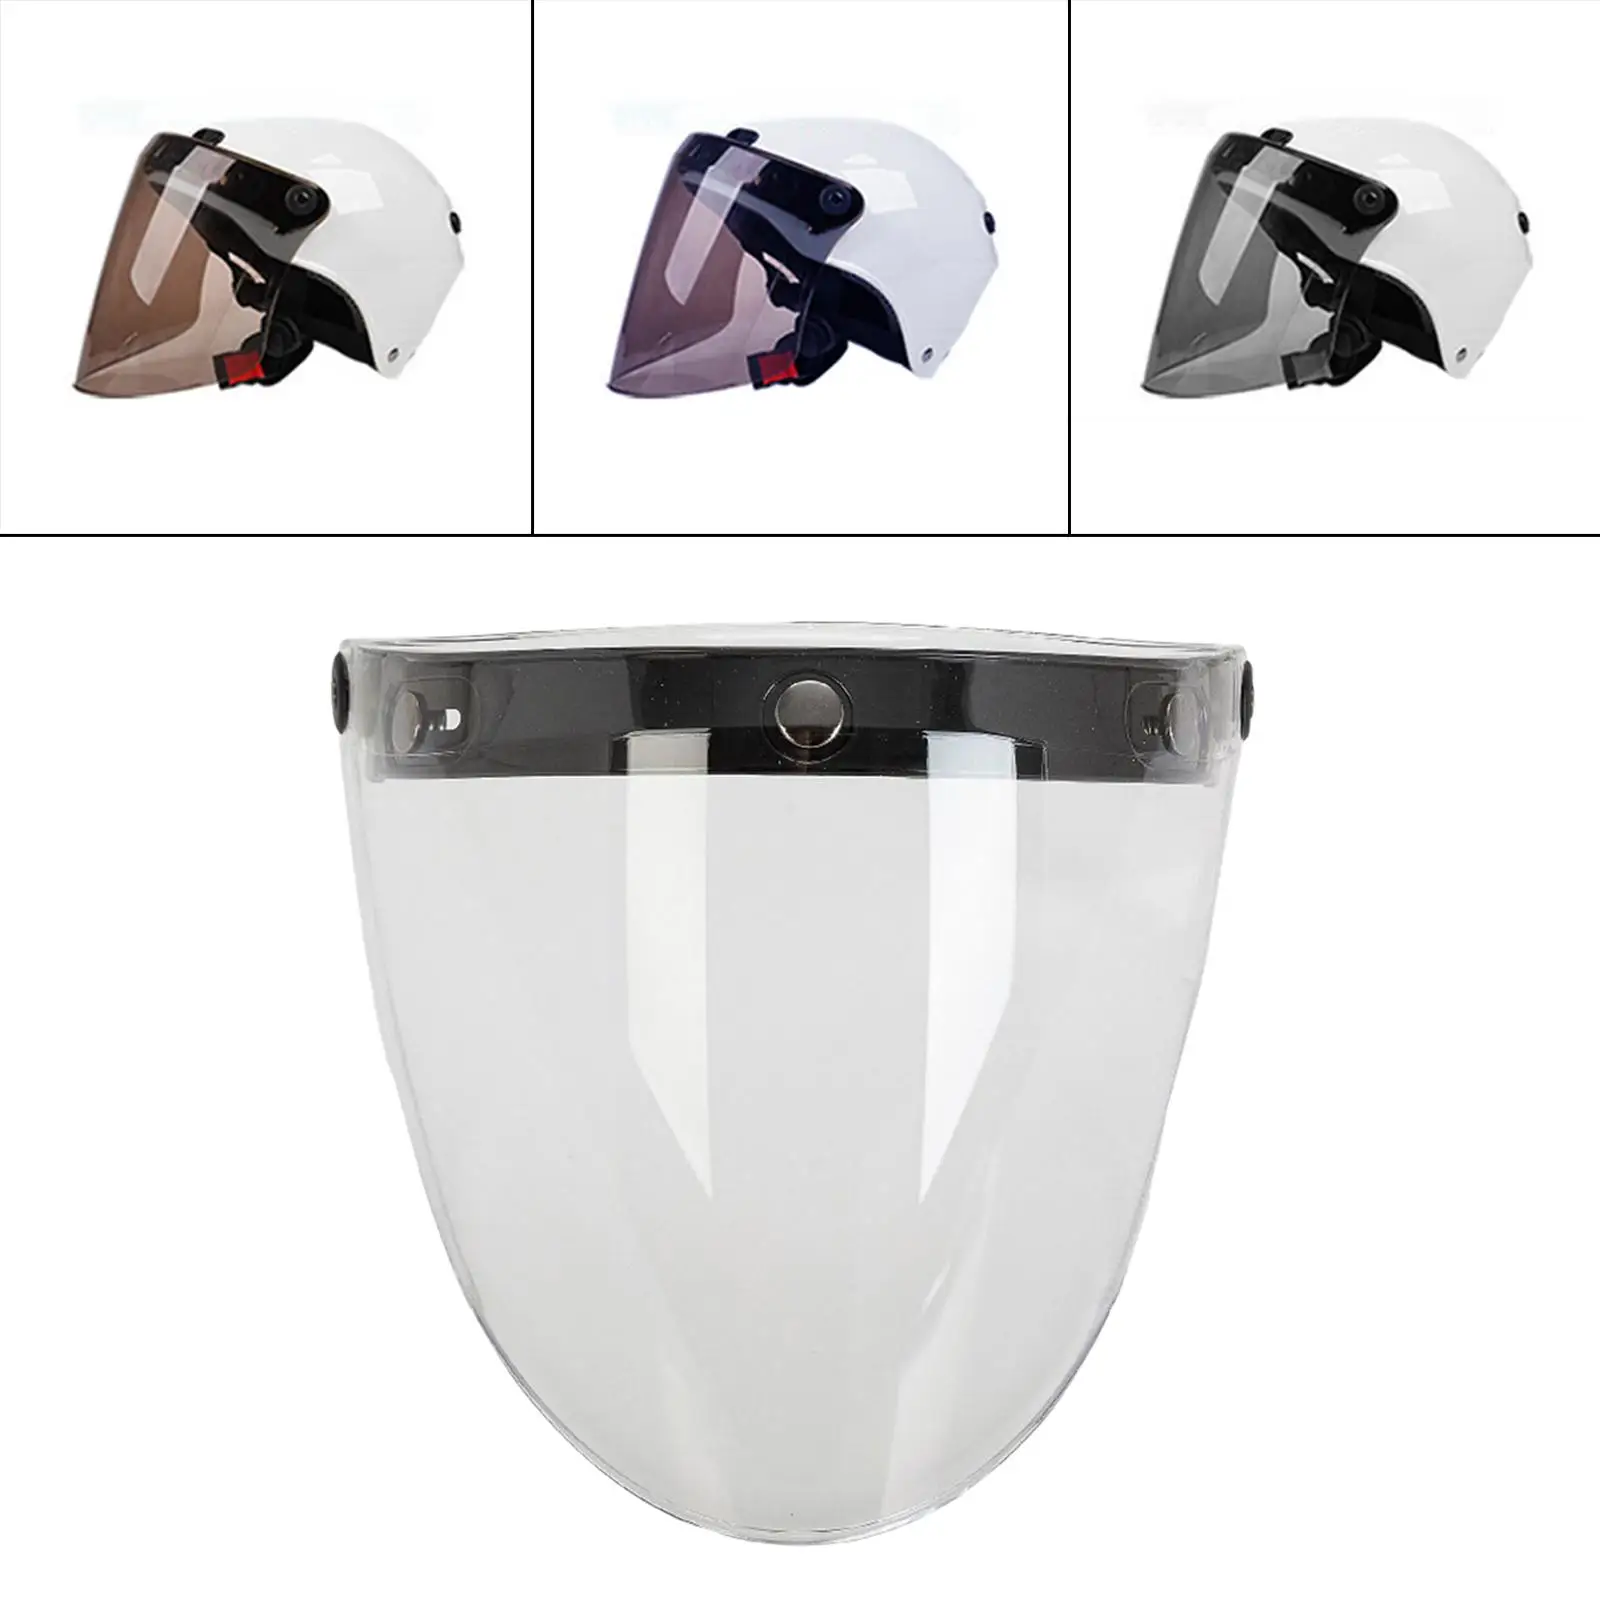 Motorcycle s Visor   up High Strength PC Lens Face 